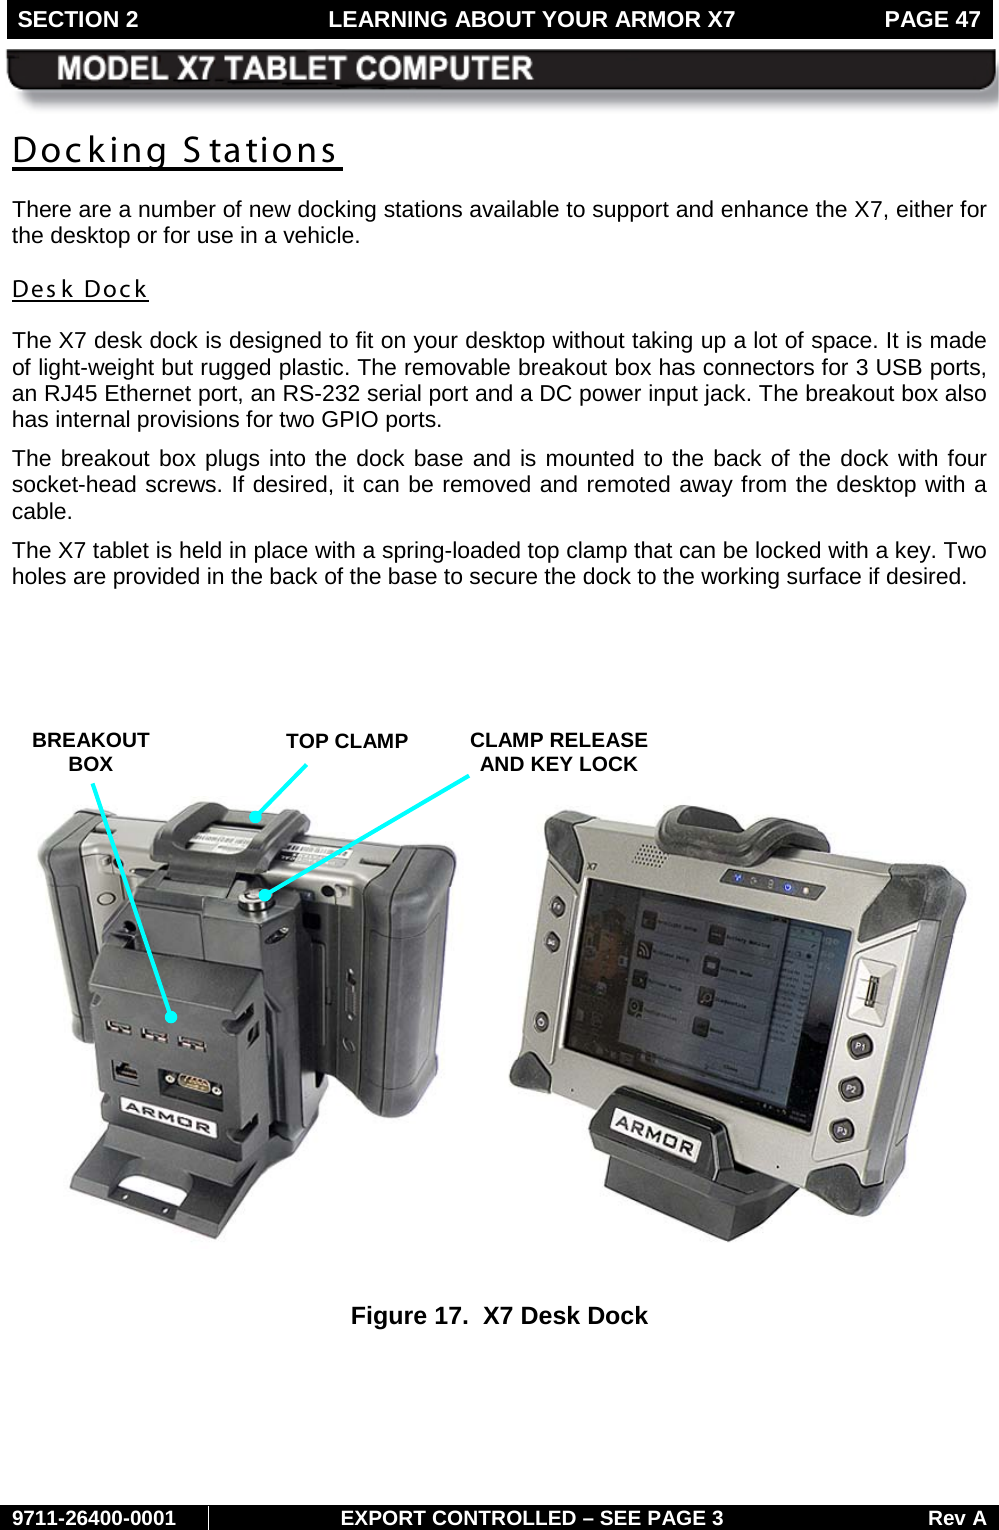 SECTION 2 LEARNING ABOUT YOUR ARMOR X7  PAGE 47        9711-26400-0001 EXPORT CONTROLLED – SEE PAGE 3 Rev A Docking S tations  There are a number of new docking stations available to support and enhance the X7, either for the desktop or for use in a vehicle. Desk Dock The X7 desk dock is designed to fit on your desktop without taking up a lot of space. It is made of light-weight but rugged plastic. The removable breakout box has connectors for 3 USB ports, an RJ45 Ethernet port, an RS-232 serial port and a DC power input jack. The breakout box also has internal provisions for two GPIO ports. The breakout box plugs into the dock base and is mounted to the back of the dock with four socket-head screws. If desired, it can be removed and remoted away from the desktop with a cable. The X7 tablet is held in place with a spring-loaded top clamp that can be locked with a key. Two holes are provided in the back of the base to secure the dock to the working surface if desired.        Figure 17.  X7 Desk Dock   TOP CLAMP CLAMP RELEASE AND KEY LOCK BREAKOUT BOX 